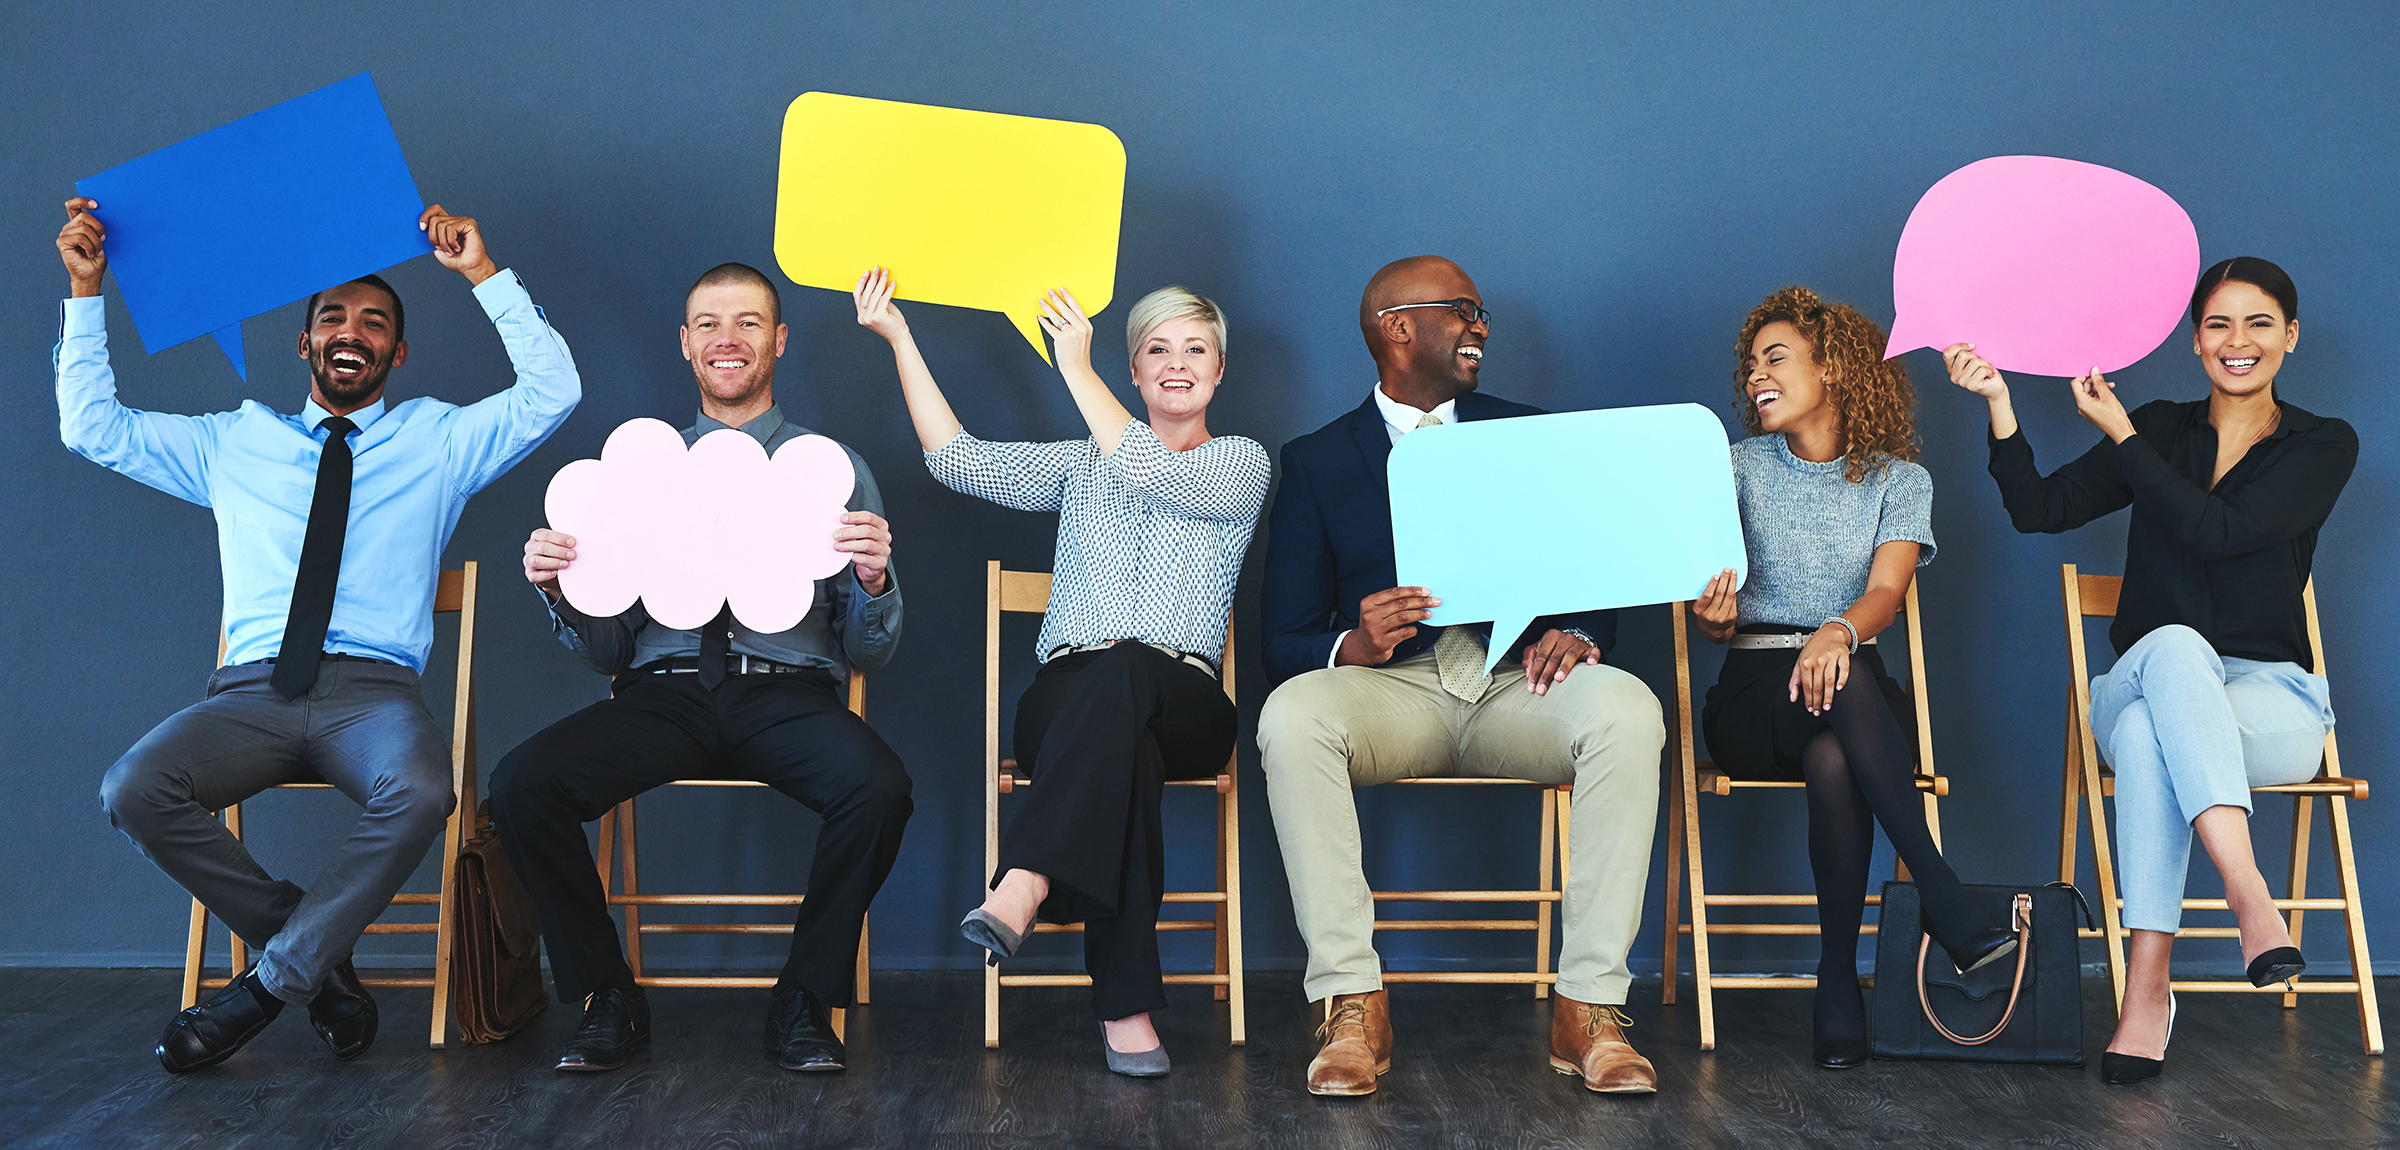 Group of adults sitting on chairs holding blank speech bubbles made of coloured paper